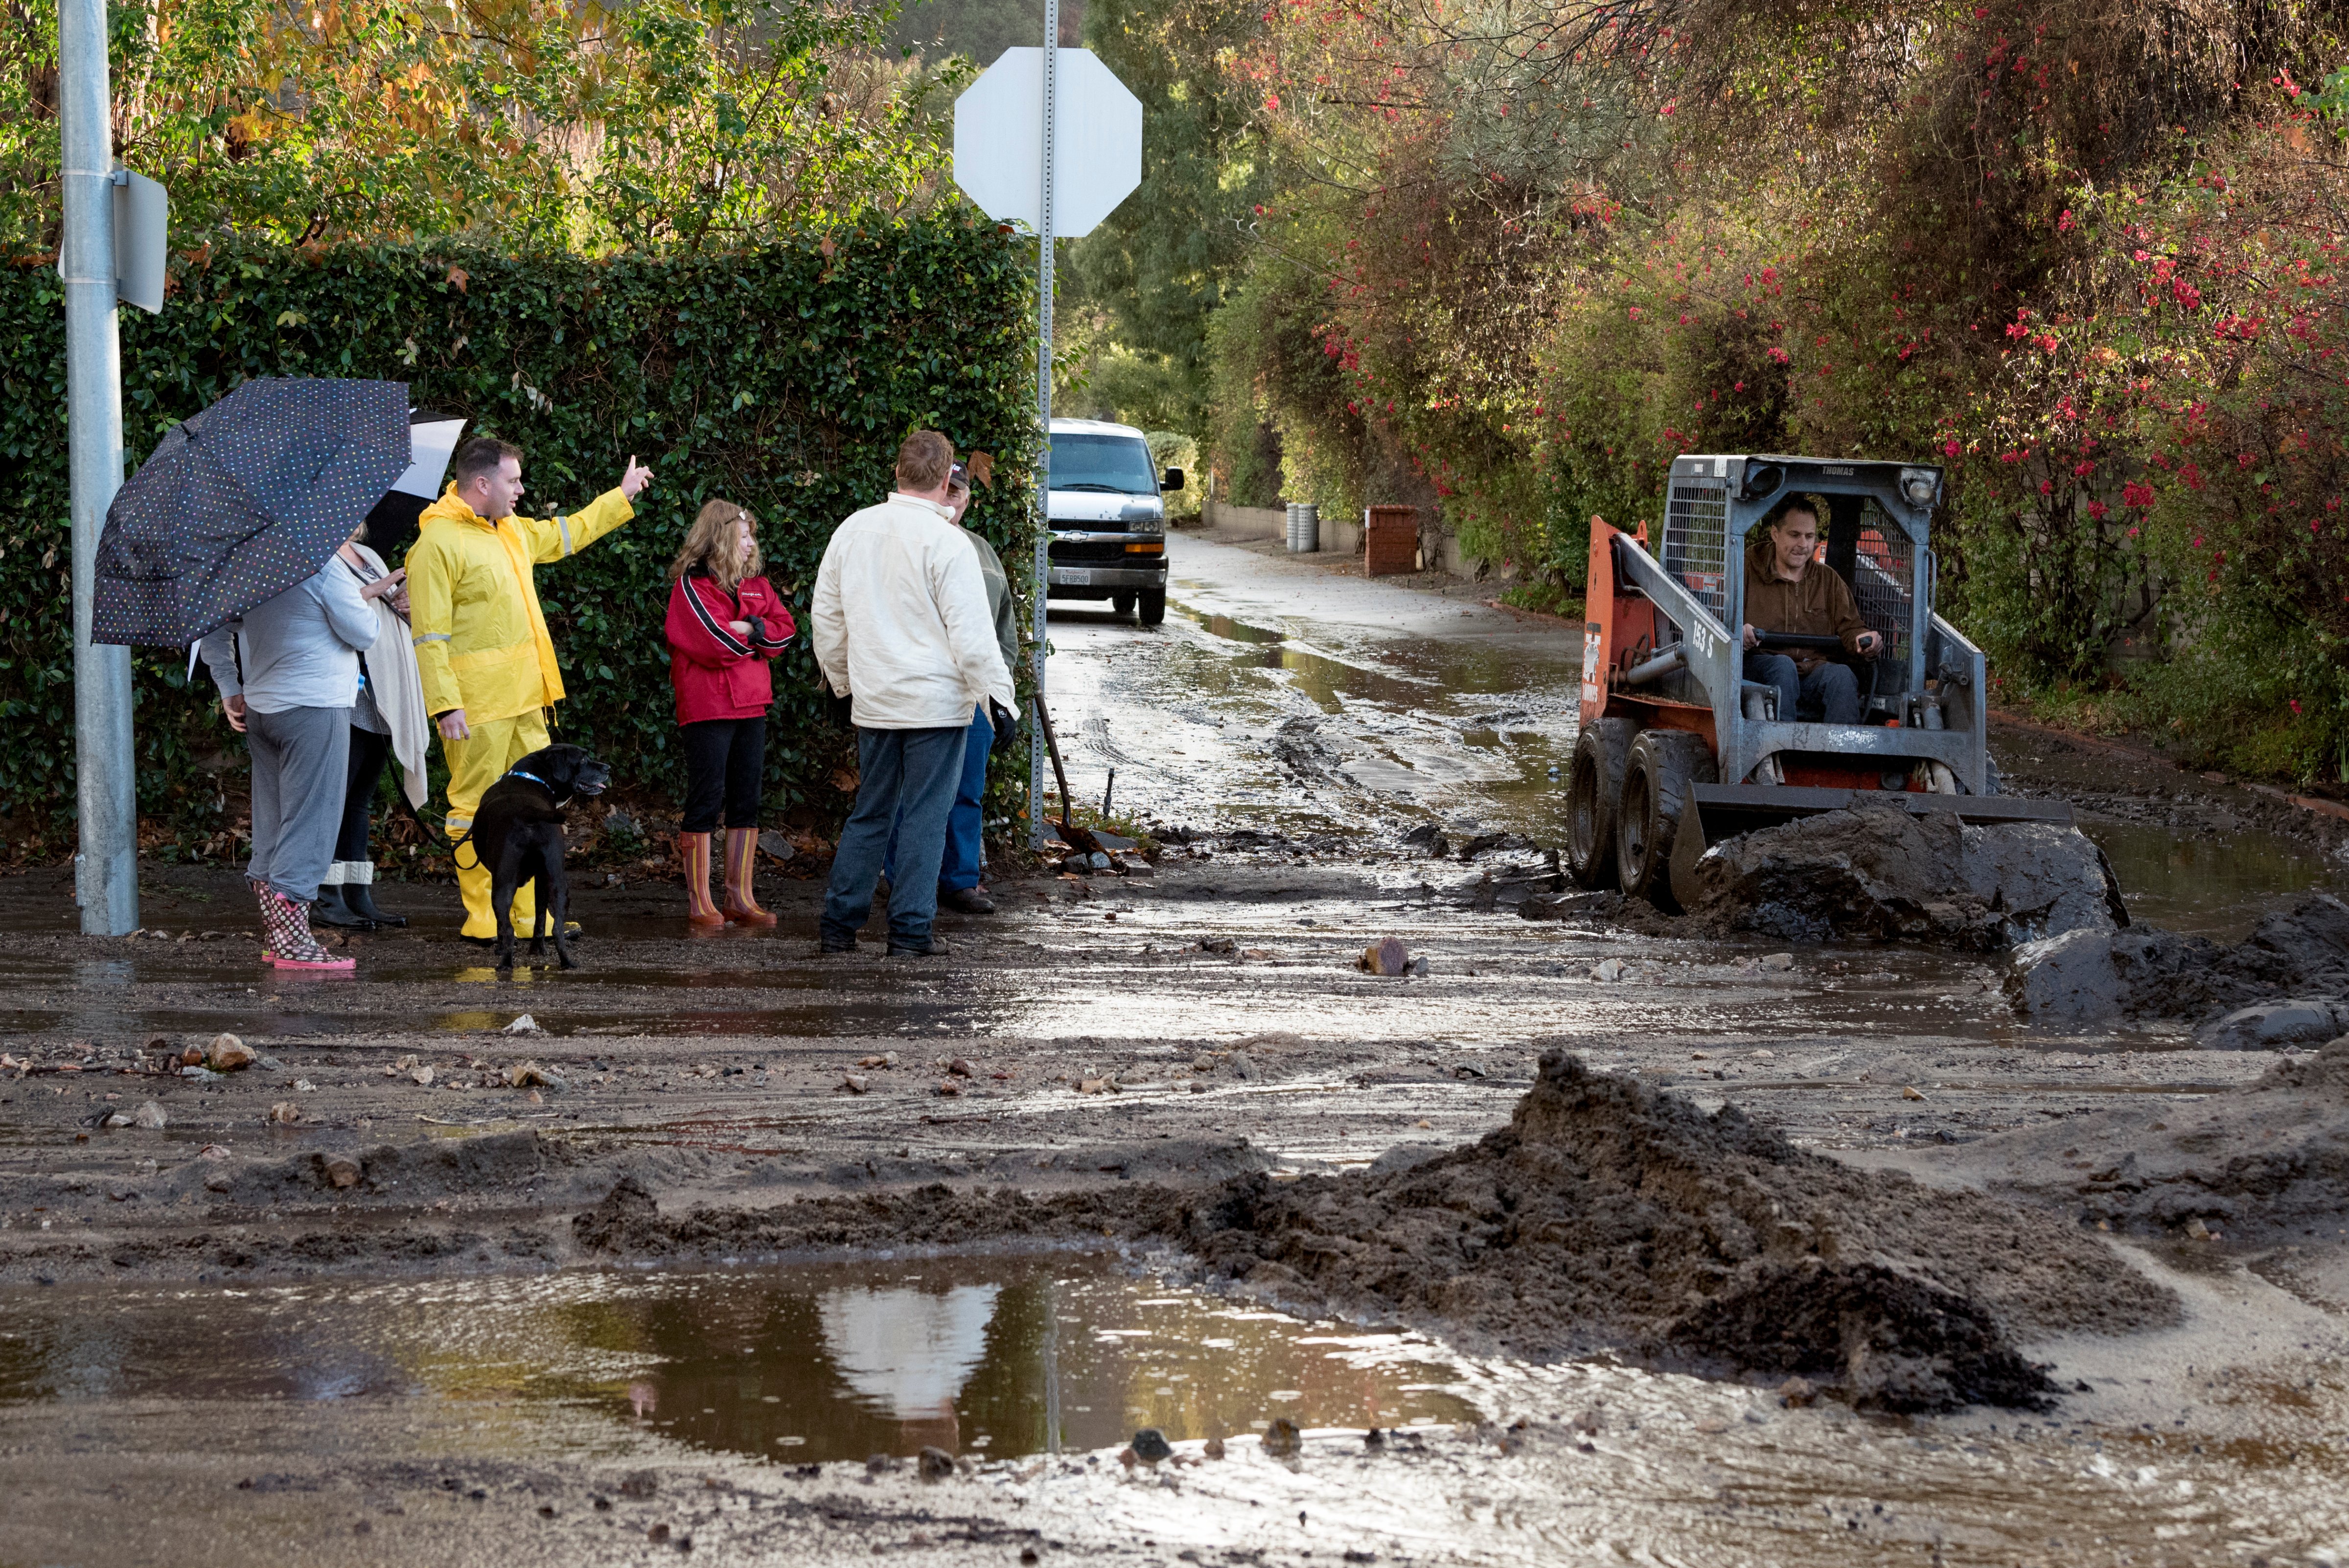 Residents look on as a man clears debris from a mudslide in Los Angeles, California on January 9, 2018. The deadly storm claimed the lives of 13 people in Santa Barbara County. Flash flooding also occurred in the recently burned areas of Ventura and Los Angeles counties. (NurPhoto—NurPhoto via Getty Images)